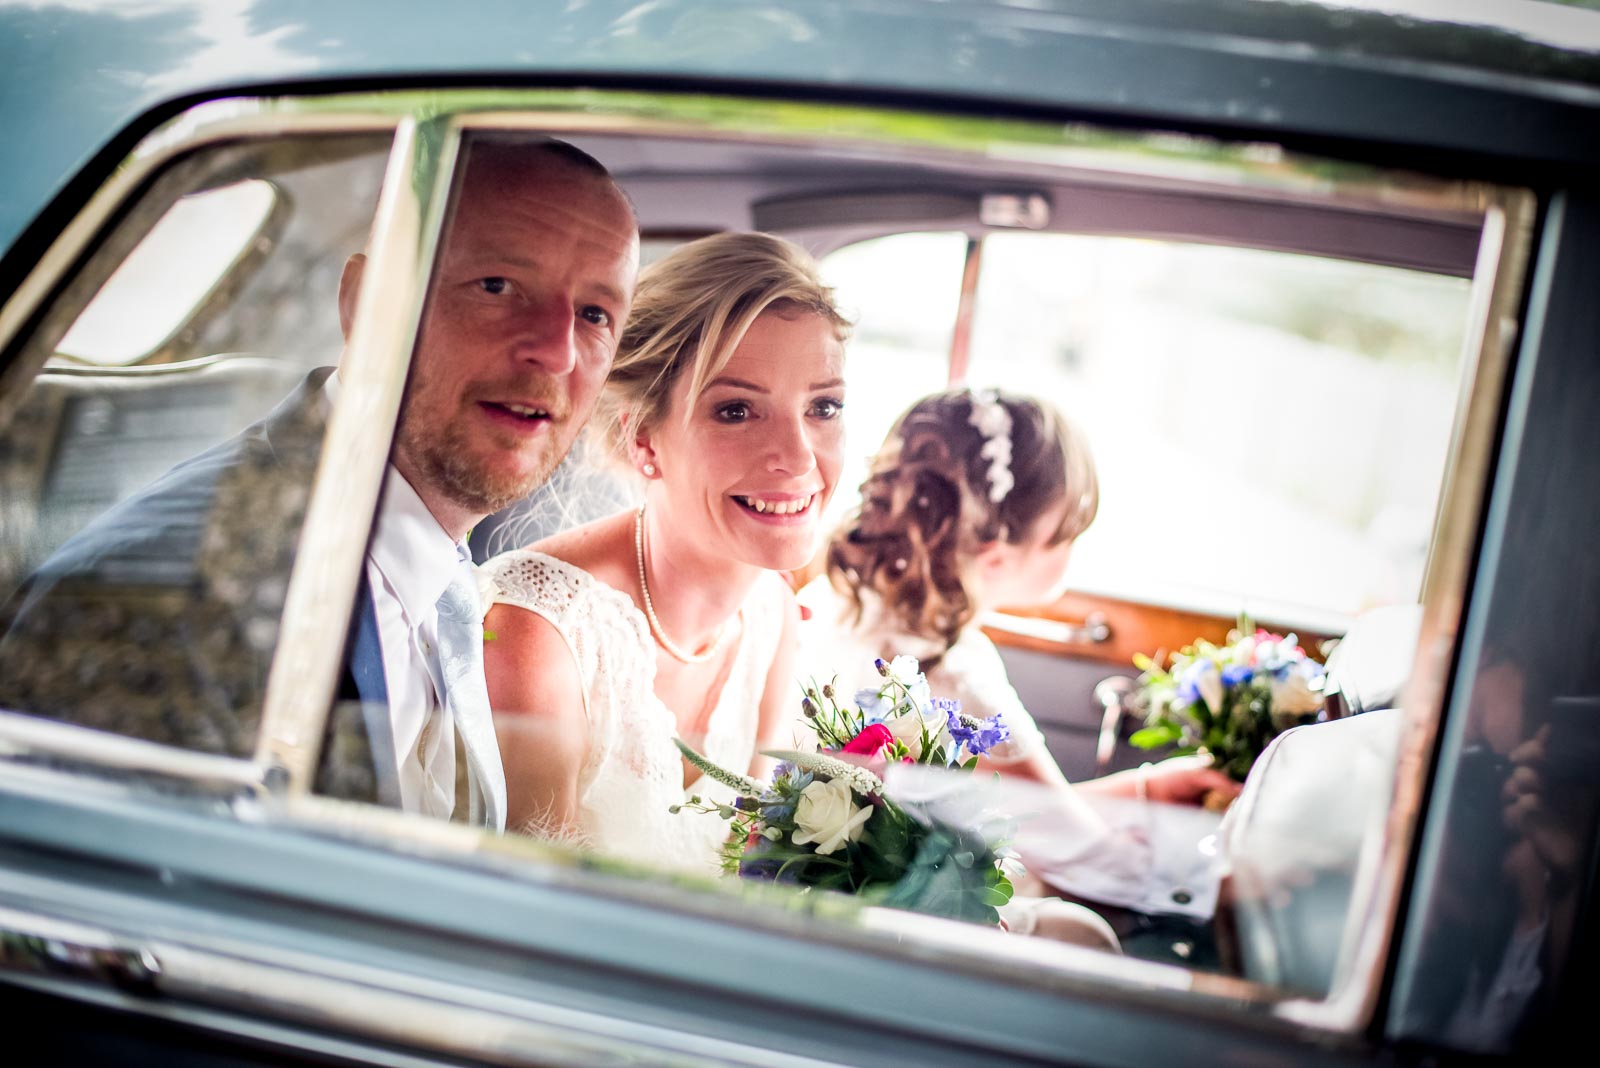 Emily and Richard depart from their wedding at Lewes Town Hall in a vintage Rolls Royce.